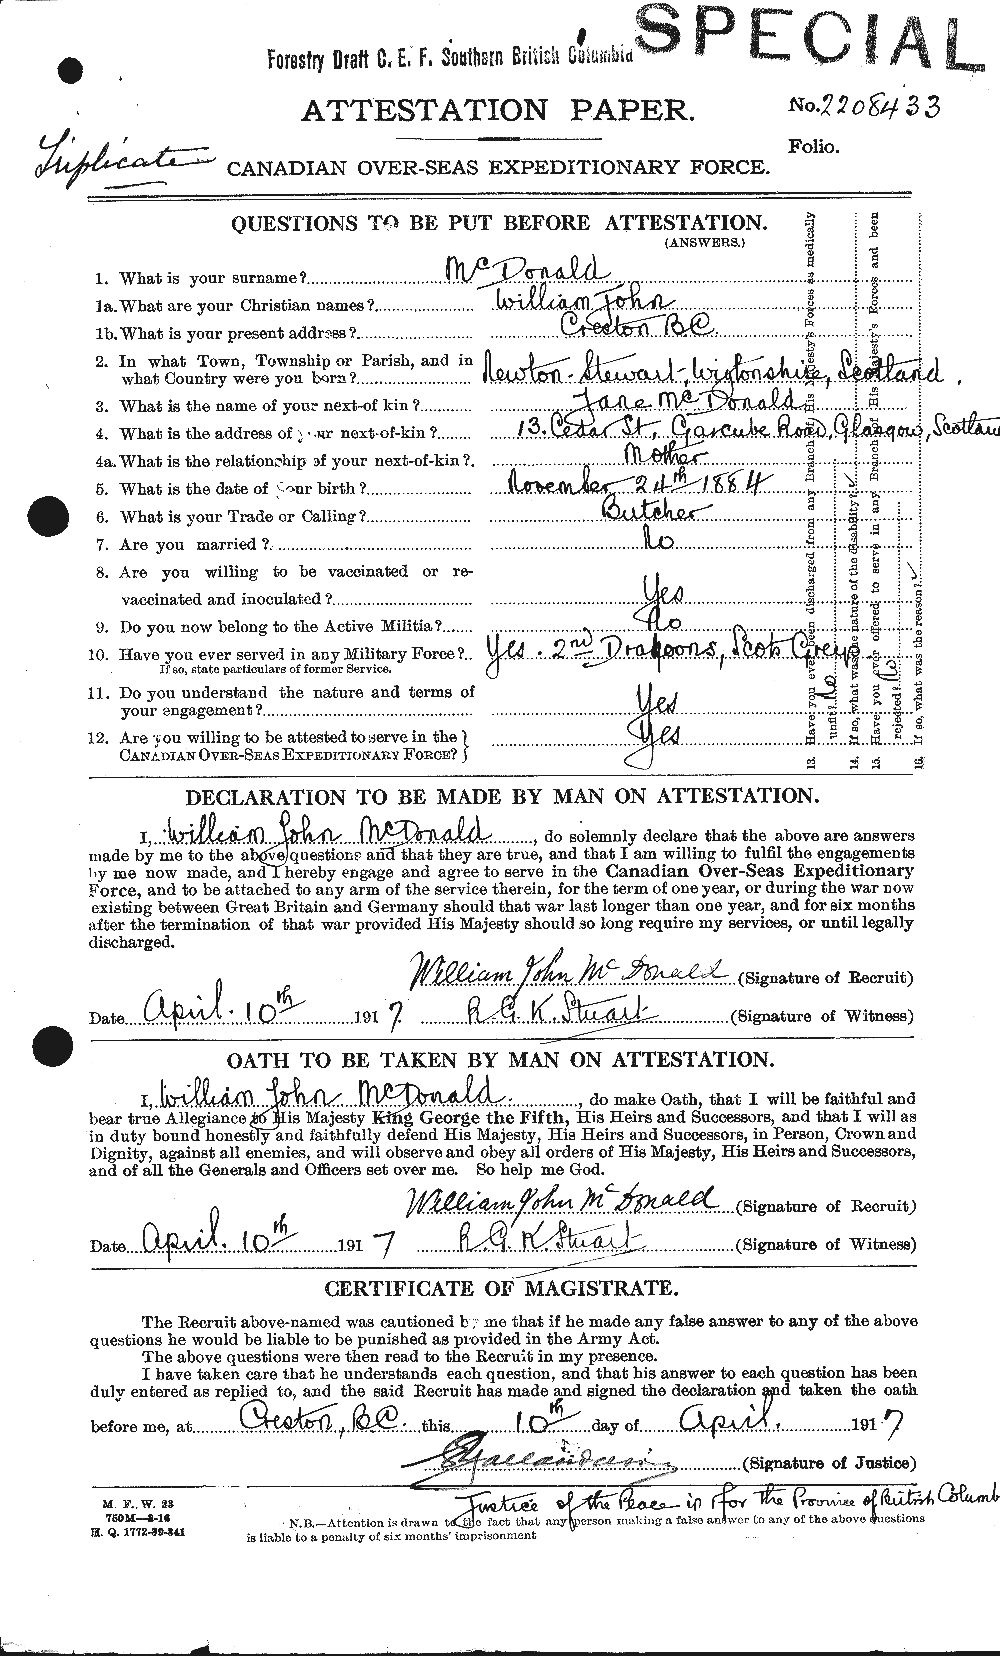 Personnel Records of the First World War - CEF 520174a